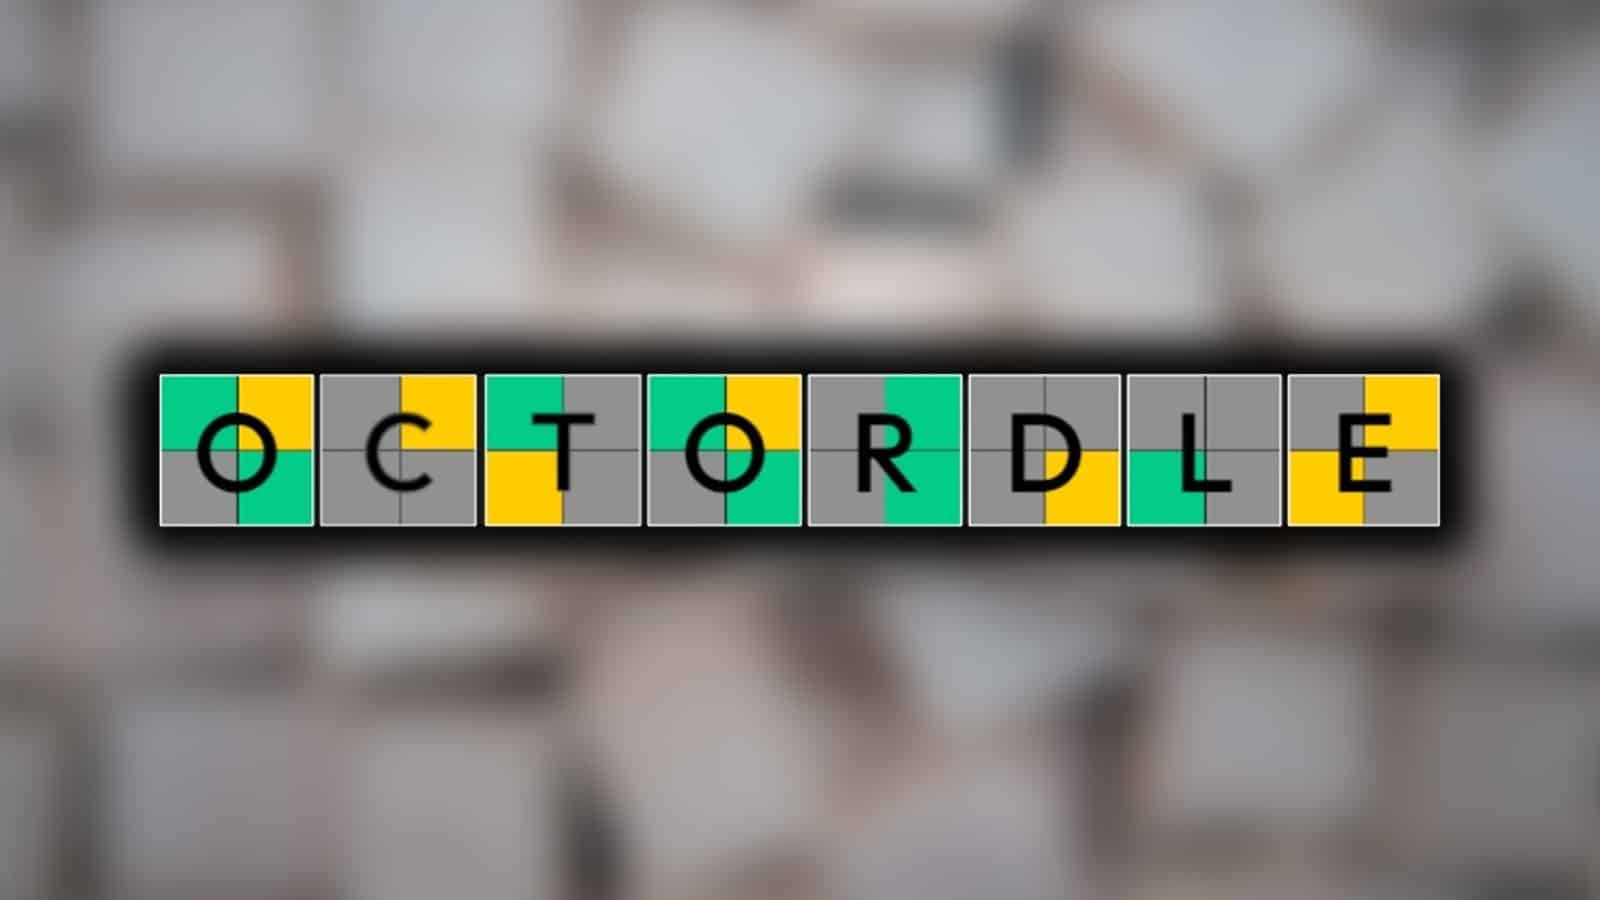 Octordle answers today: Daily Octordle hints for today’s game (March 4) – Dexerto